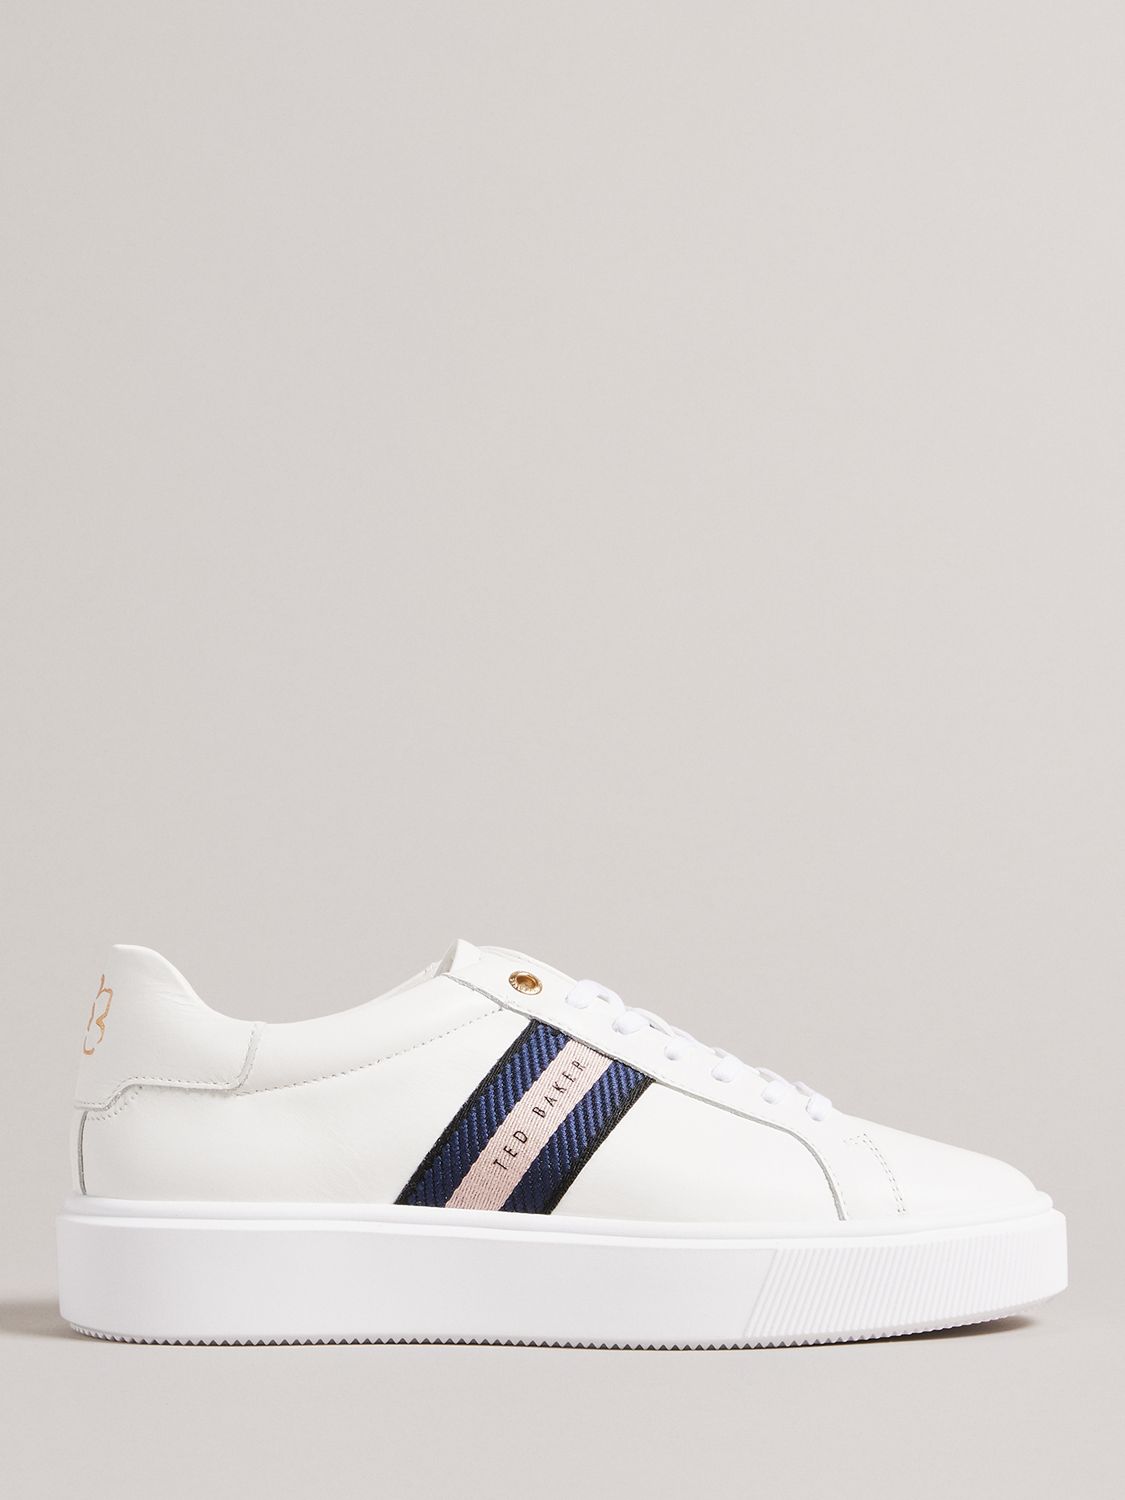 Ted Baker Lornie Webbing Trainers, Navy/White at John Lewis & Partners